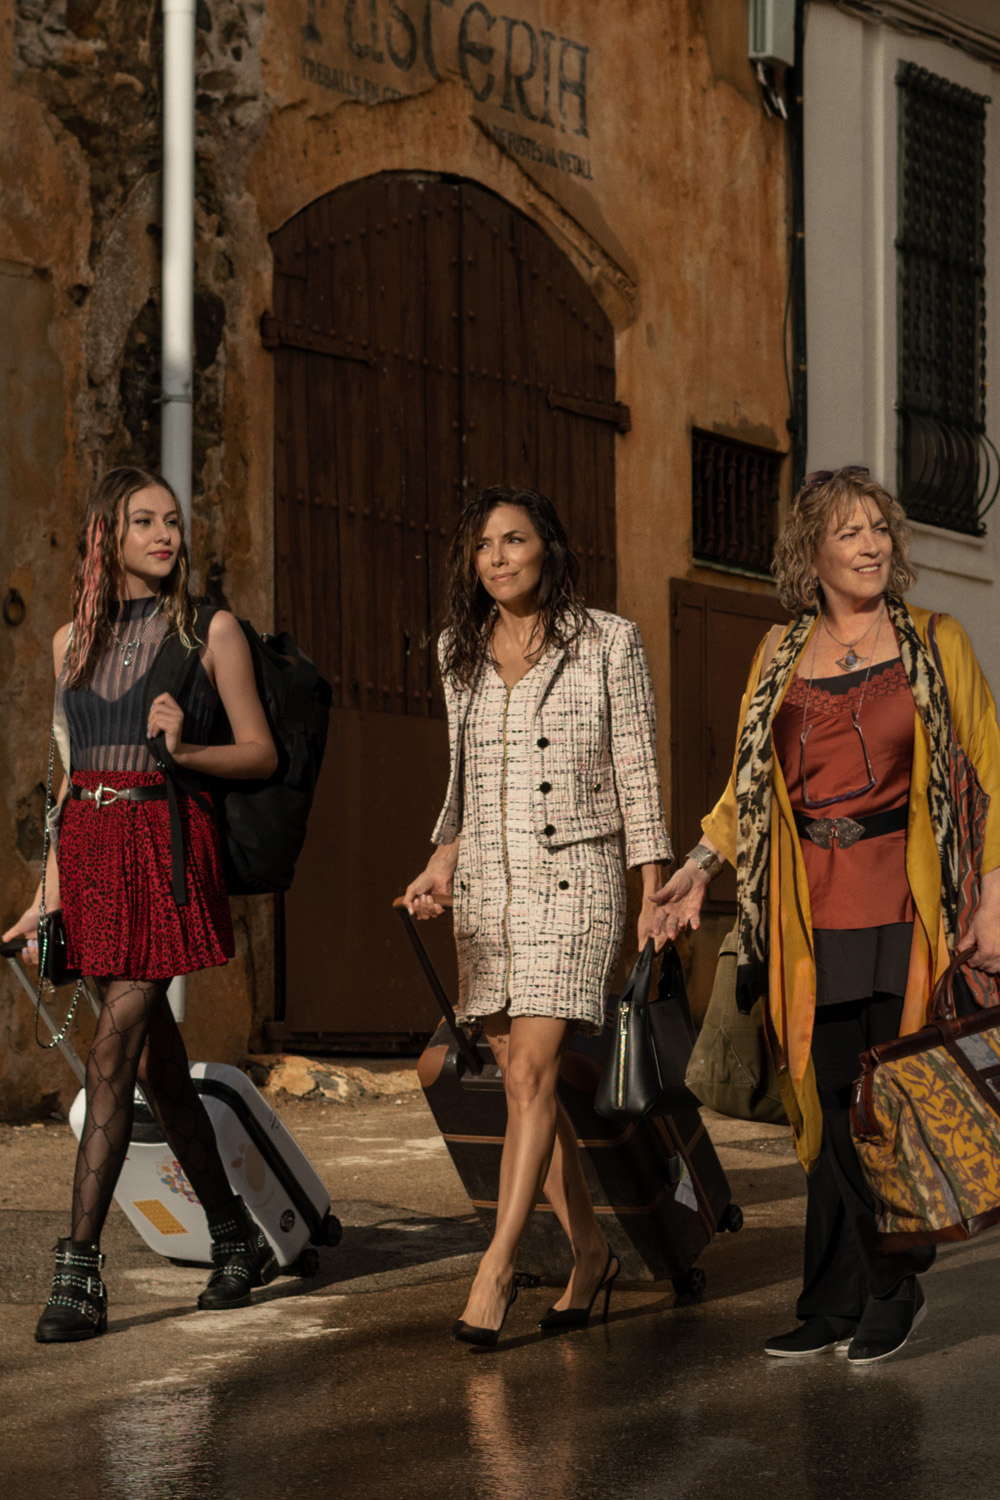 There's A Trailer For Eva Longoria & Apple TV's New Series Land of Women